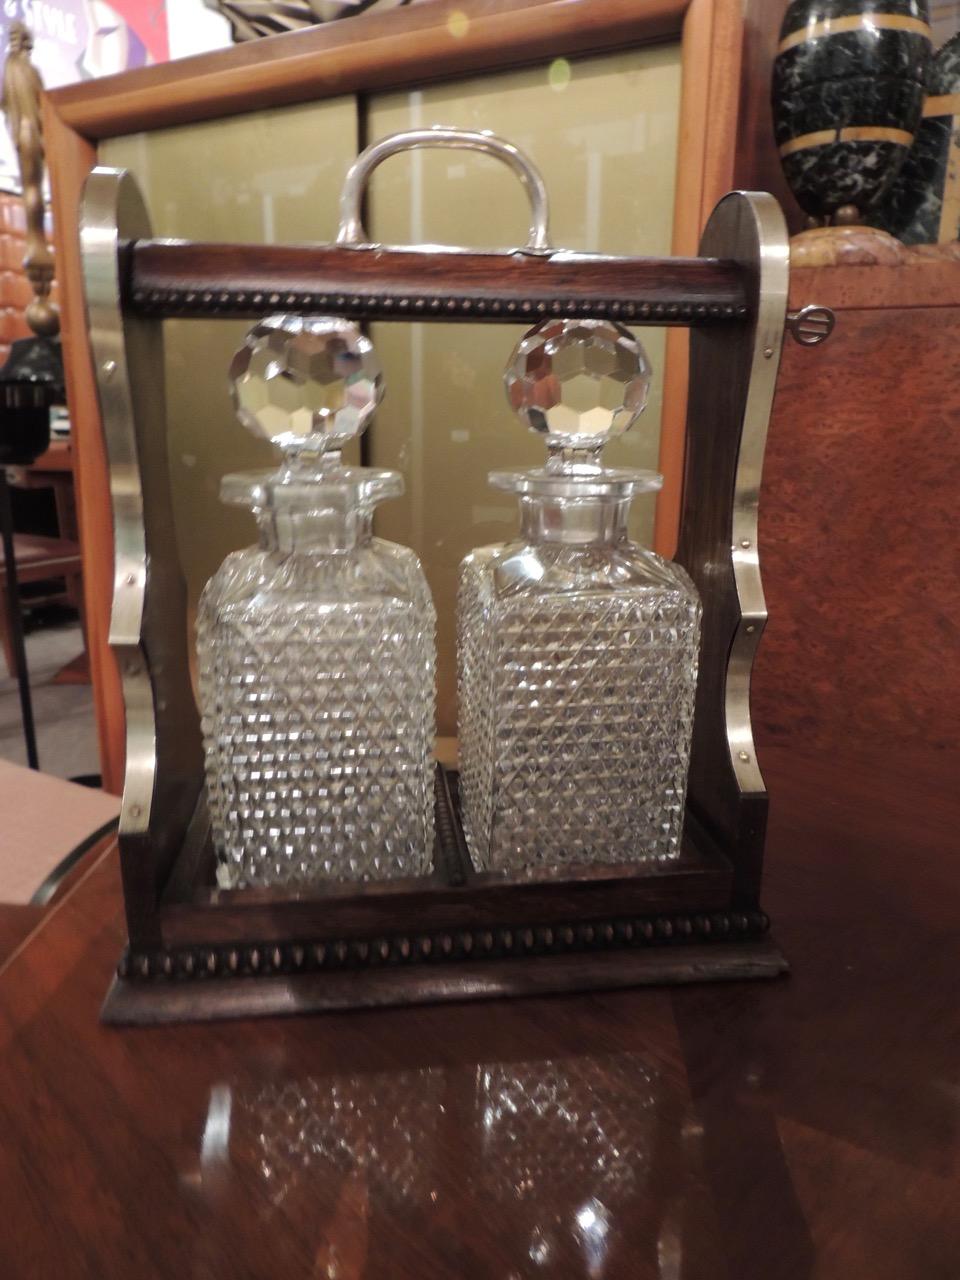 A 1920s Tantalus with crystal decanters, a rich wooden case trimmed in nickel with lock and key. Highly faceted bottle stoppers beautifully reflect the light. This is a perfect piece for display or serving. It was made for the importer Rodolfo